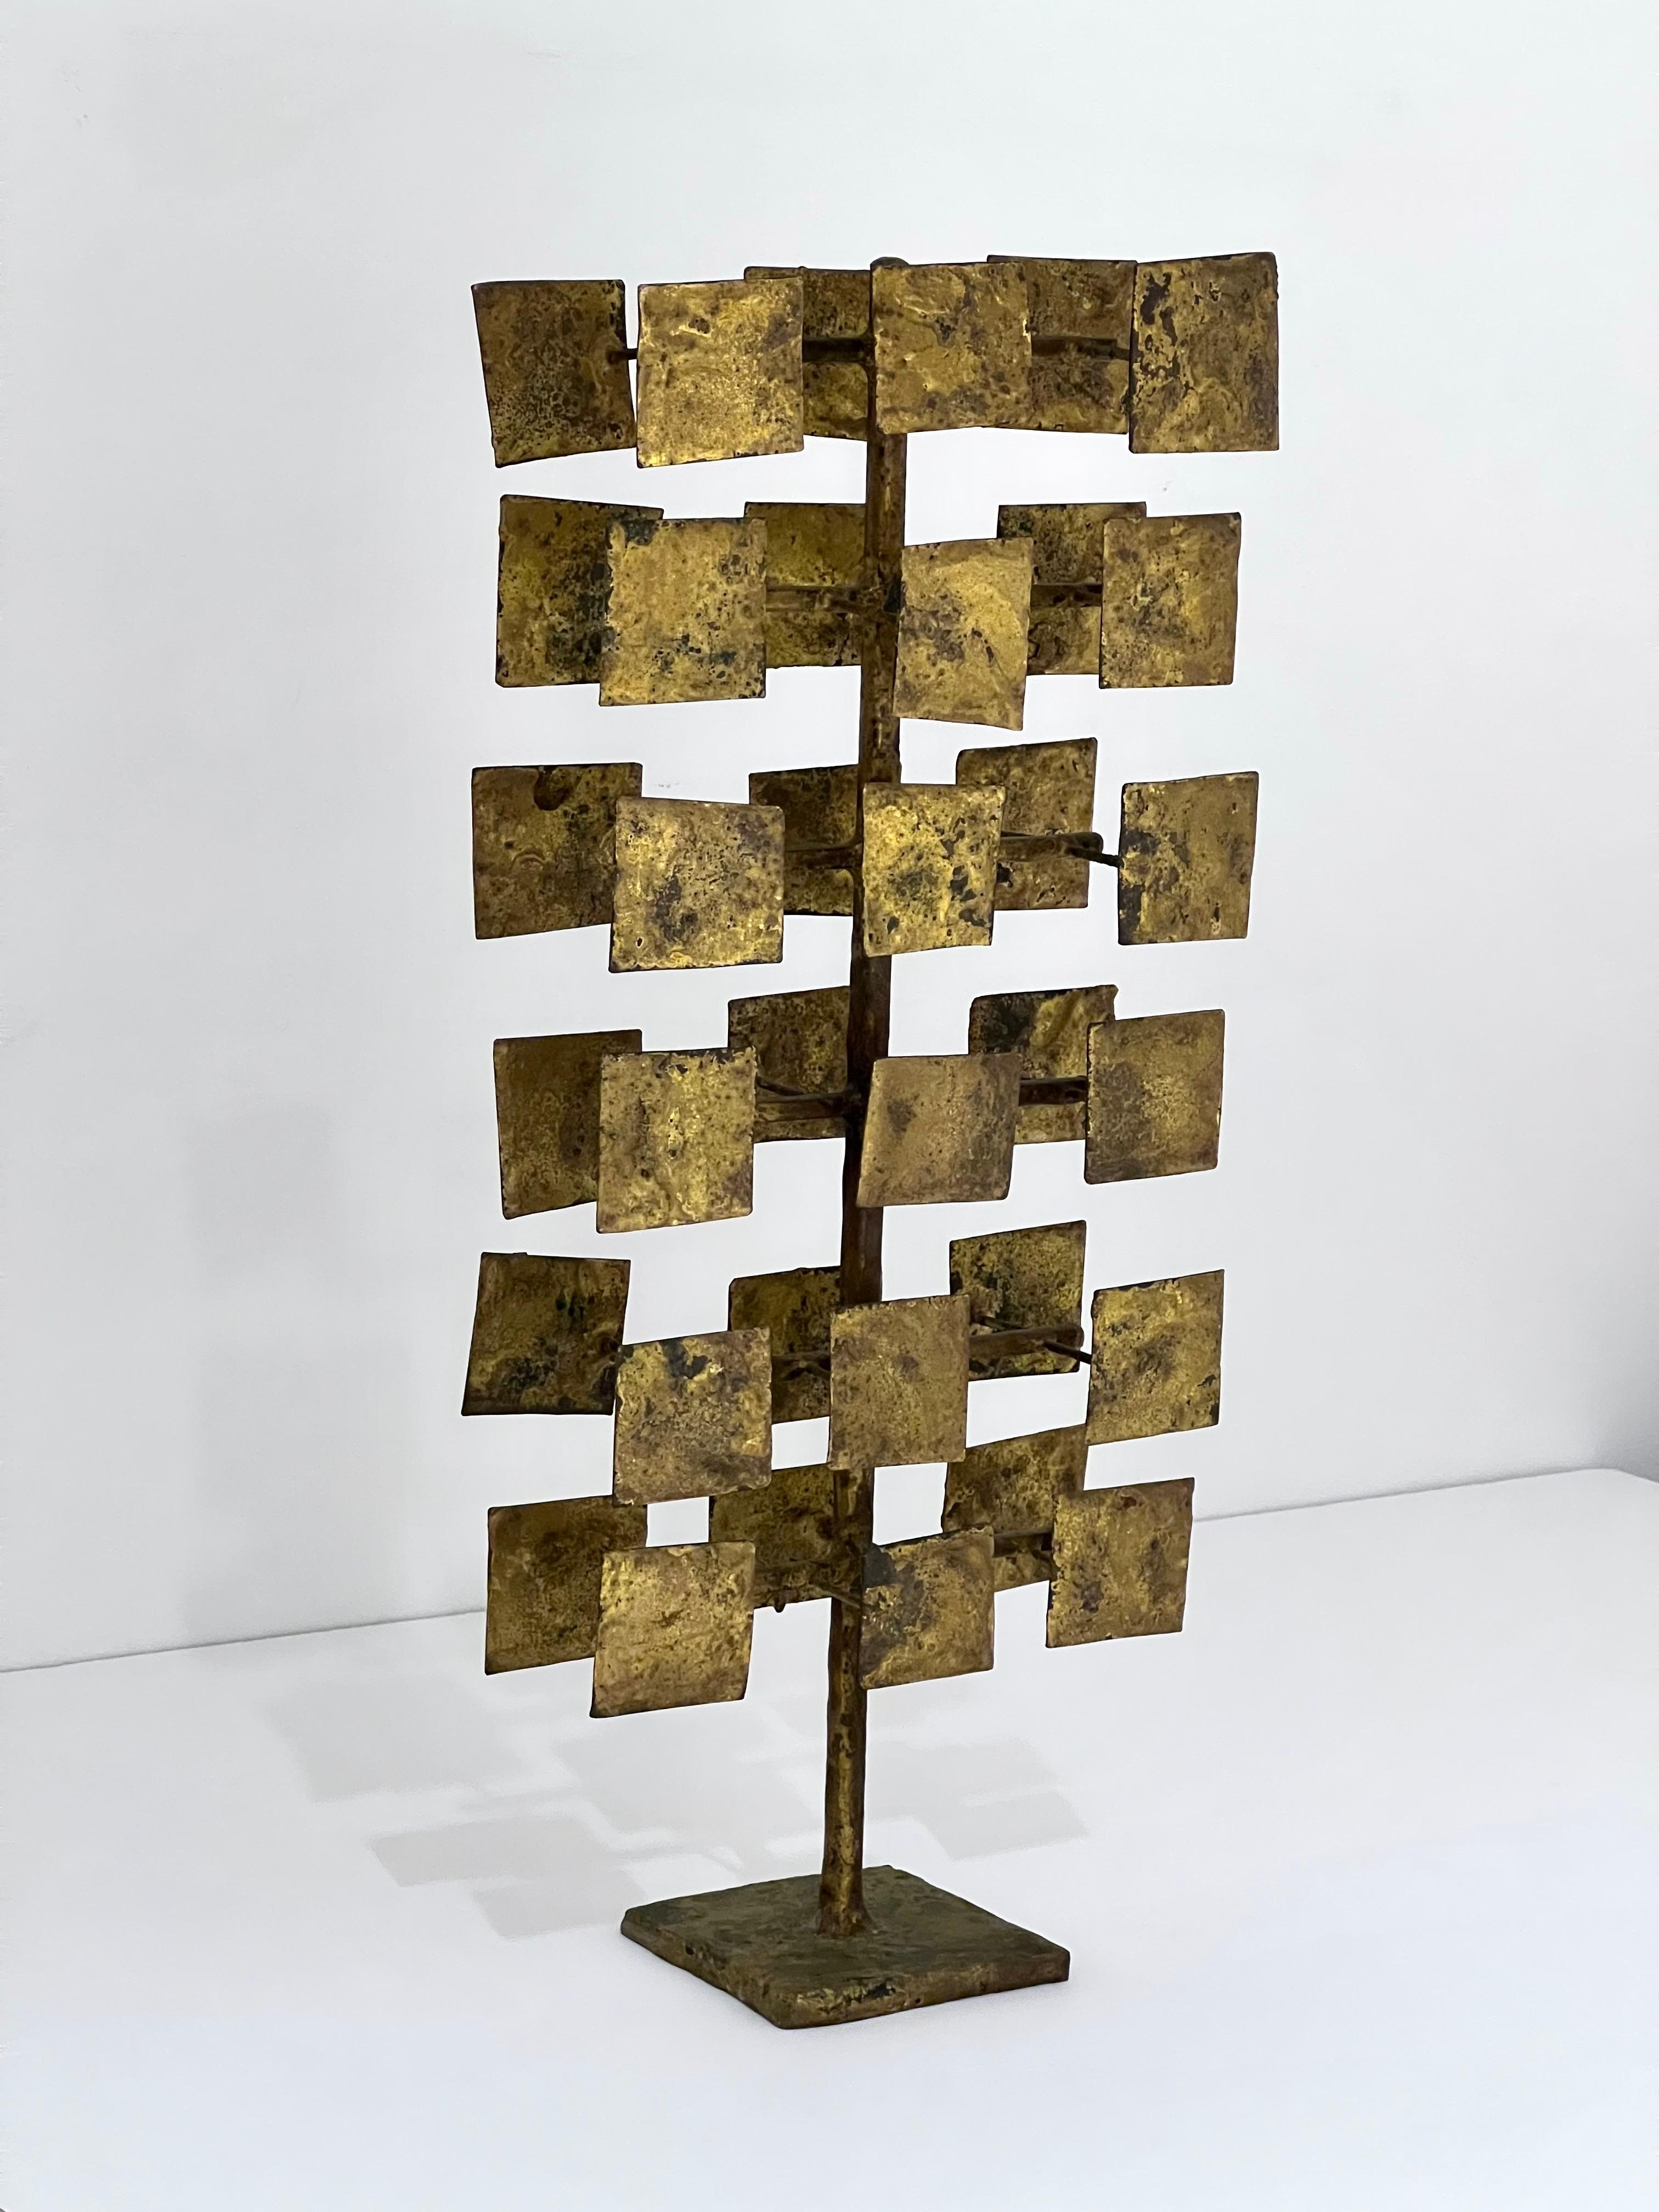 Multi-plane sculpture by Harry Bertoia made of steel and molten brass.
This was a working model for a large commission installation of ten sculptures for the First National Bank of Miami, 1958.